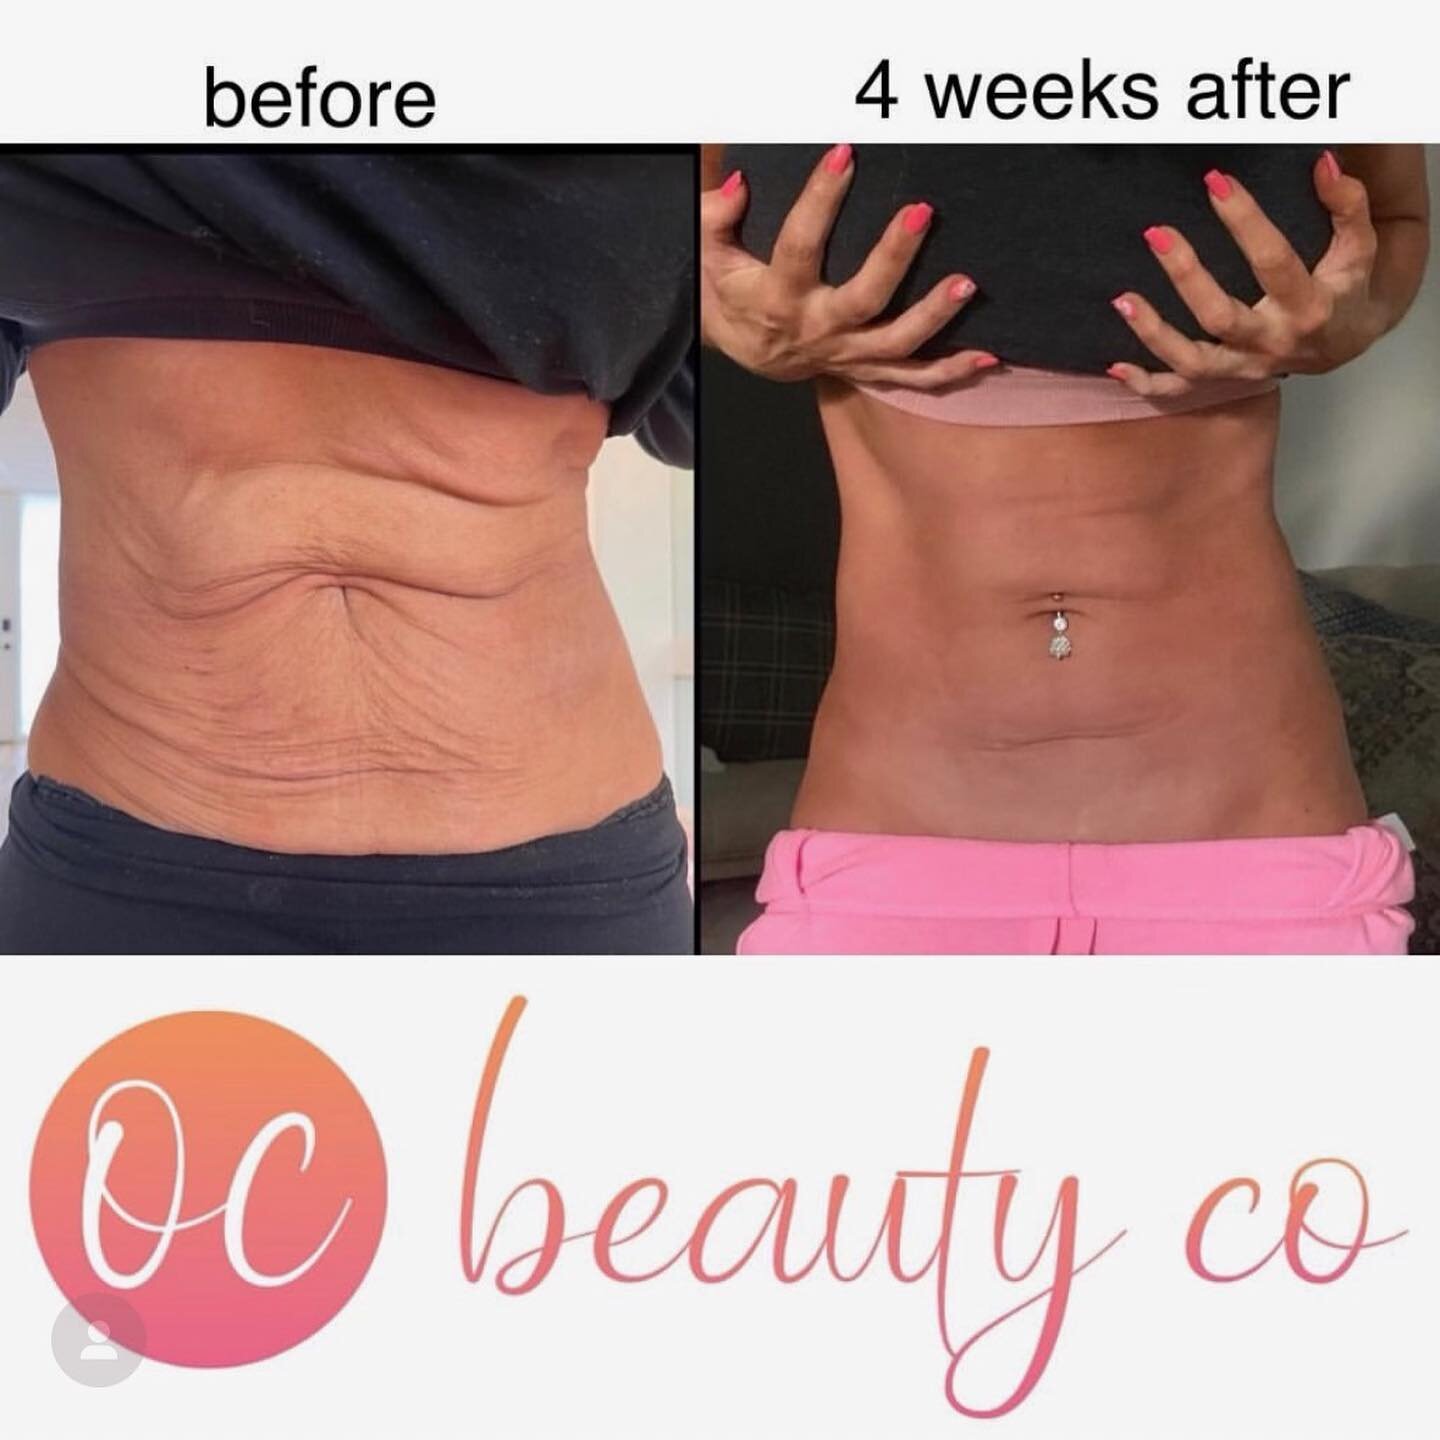 Get your skin stage ready at 👉 @ocbeautyco! Sometimes the skin doesn&rsquo;t always follow your muscles when getting tight. Let @ocbeautyco help get you ready with some amazing skin tightening! Swipe right to see the stages of this amazing transform